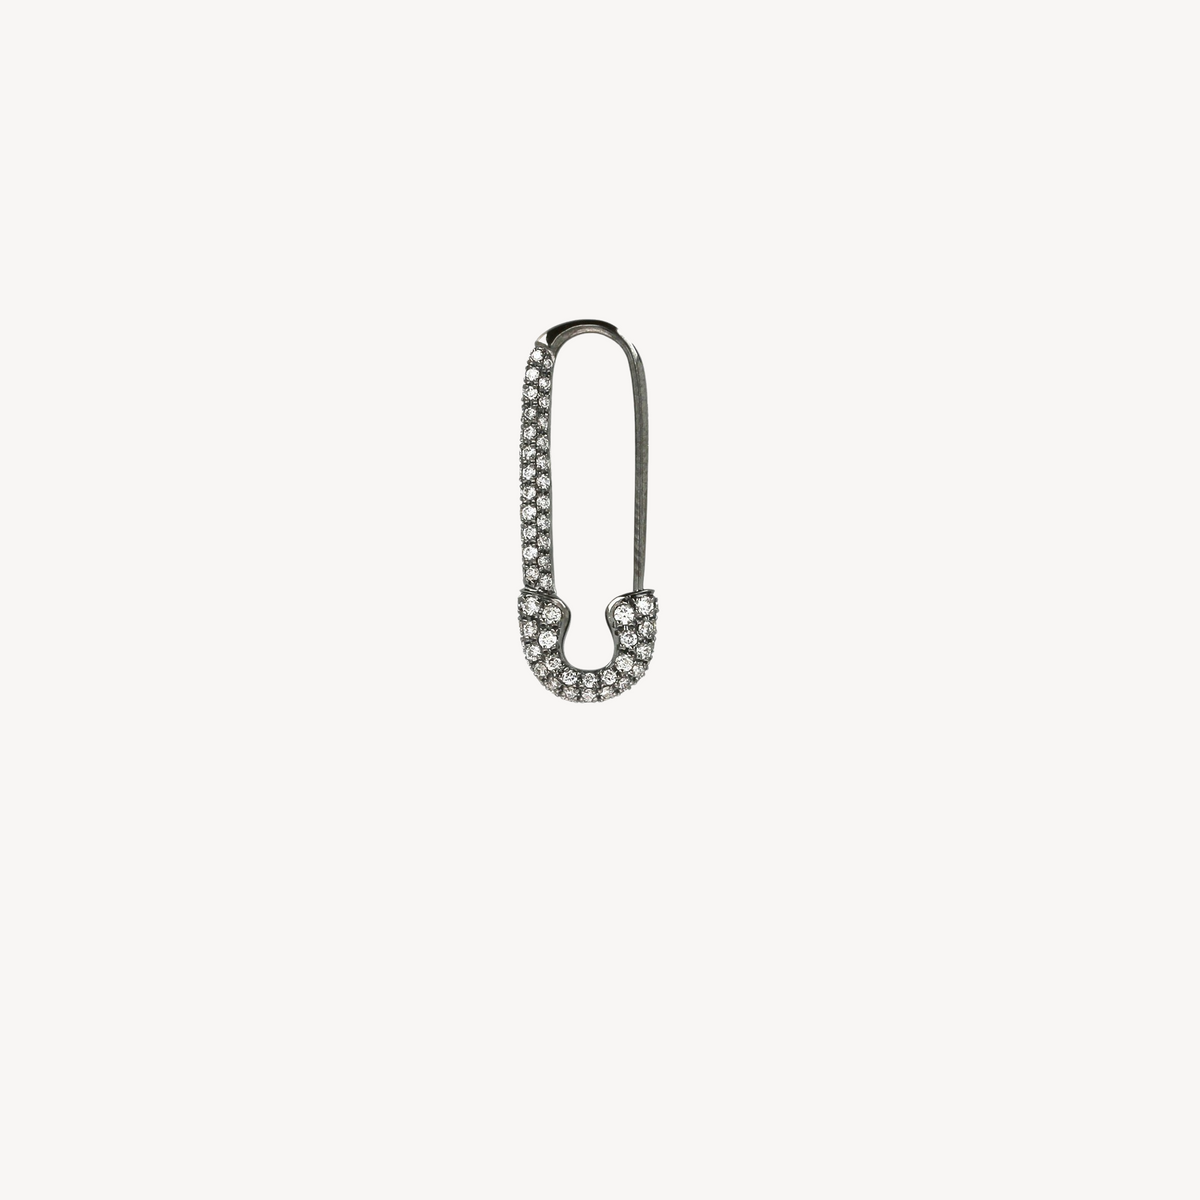 Black Gold and White Diamonds Safety Pin Earring